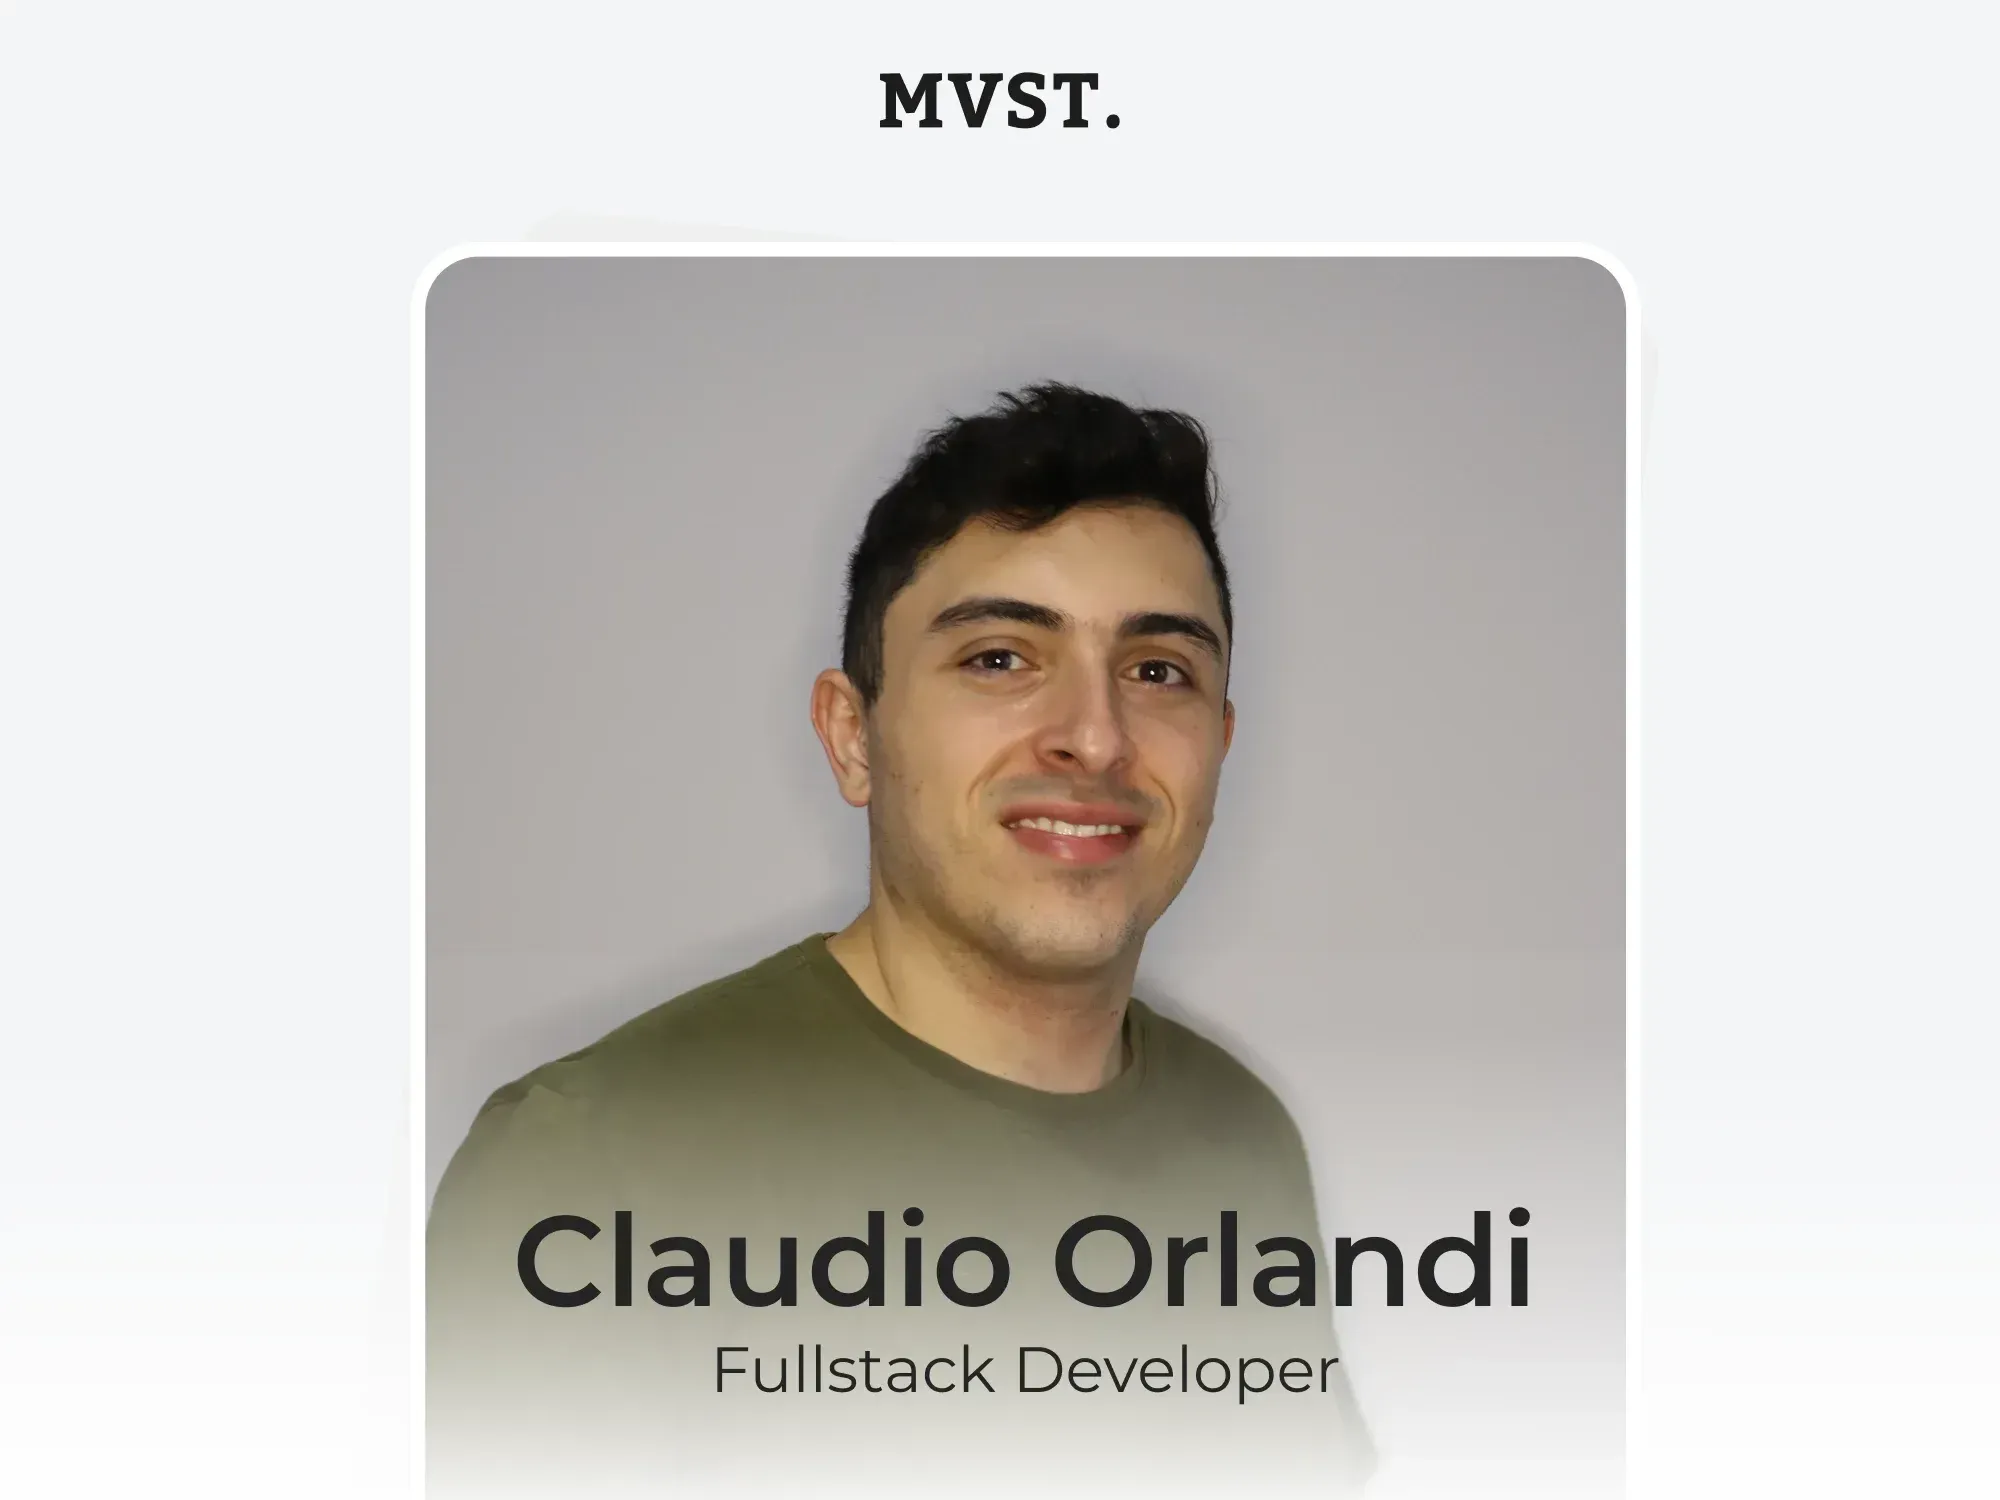 Welcome to MVST, Claudio!